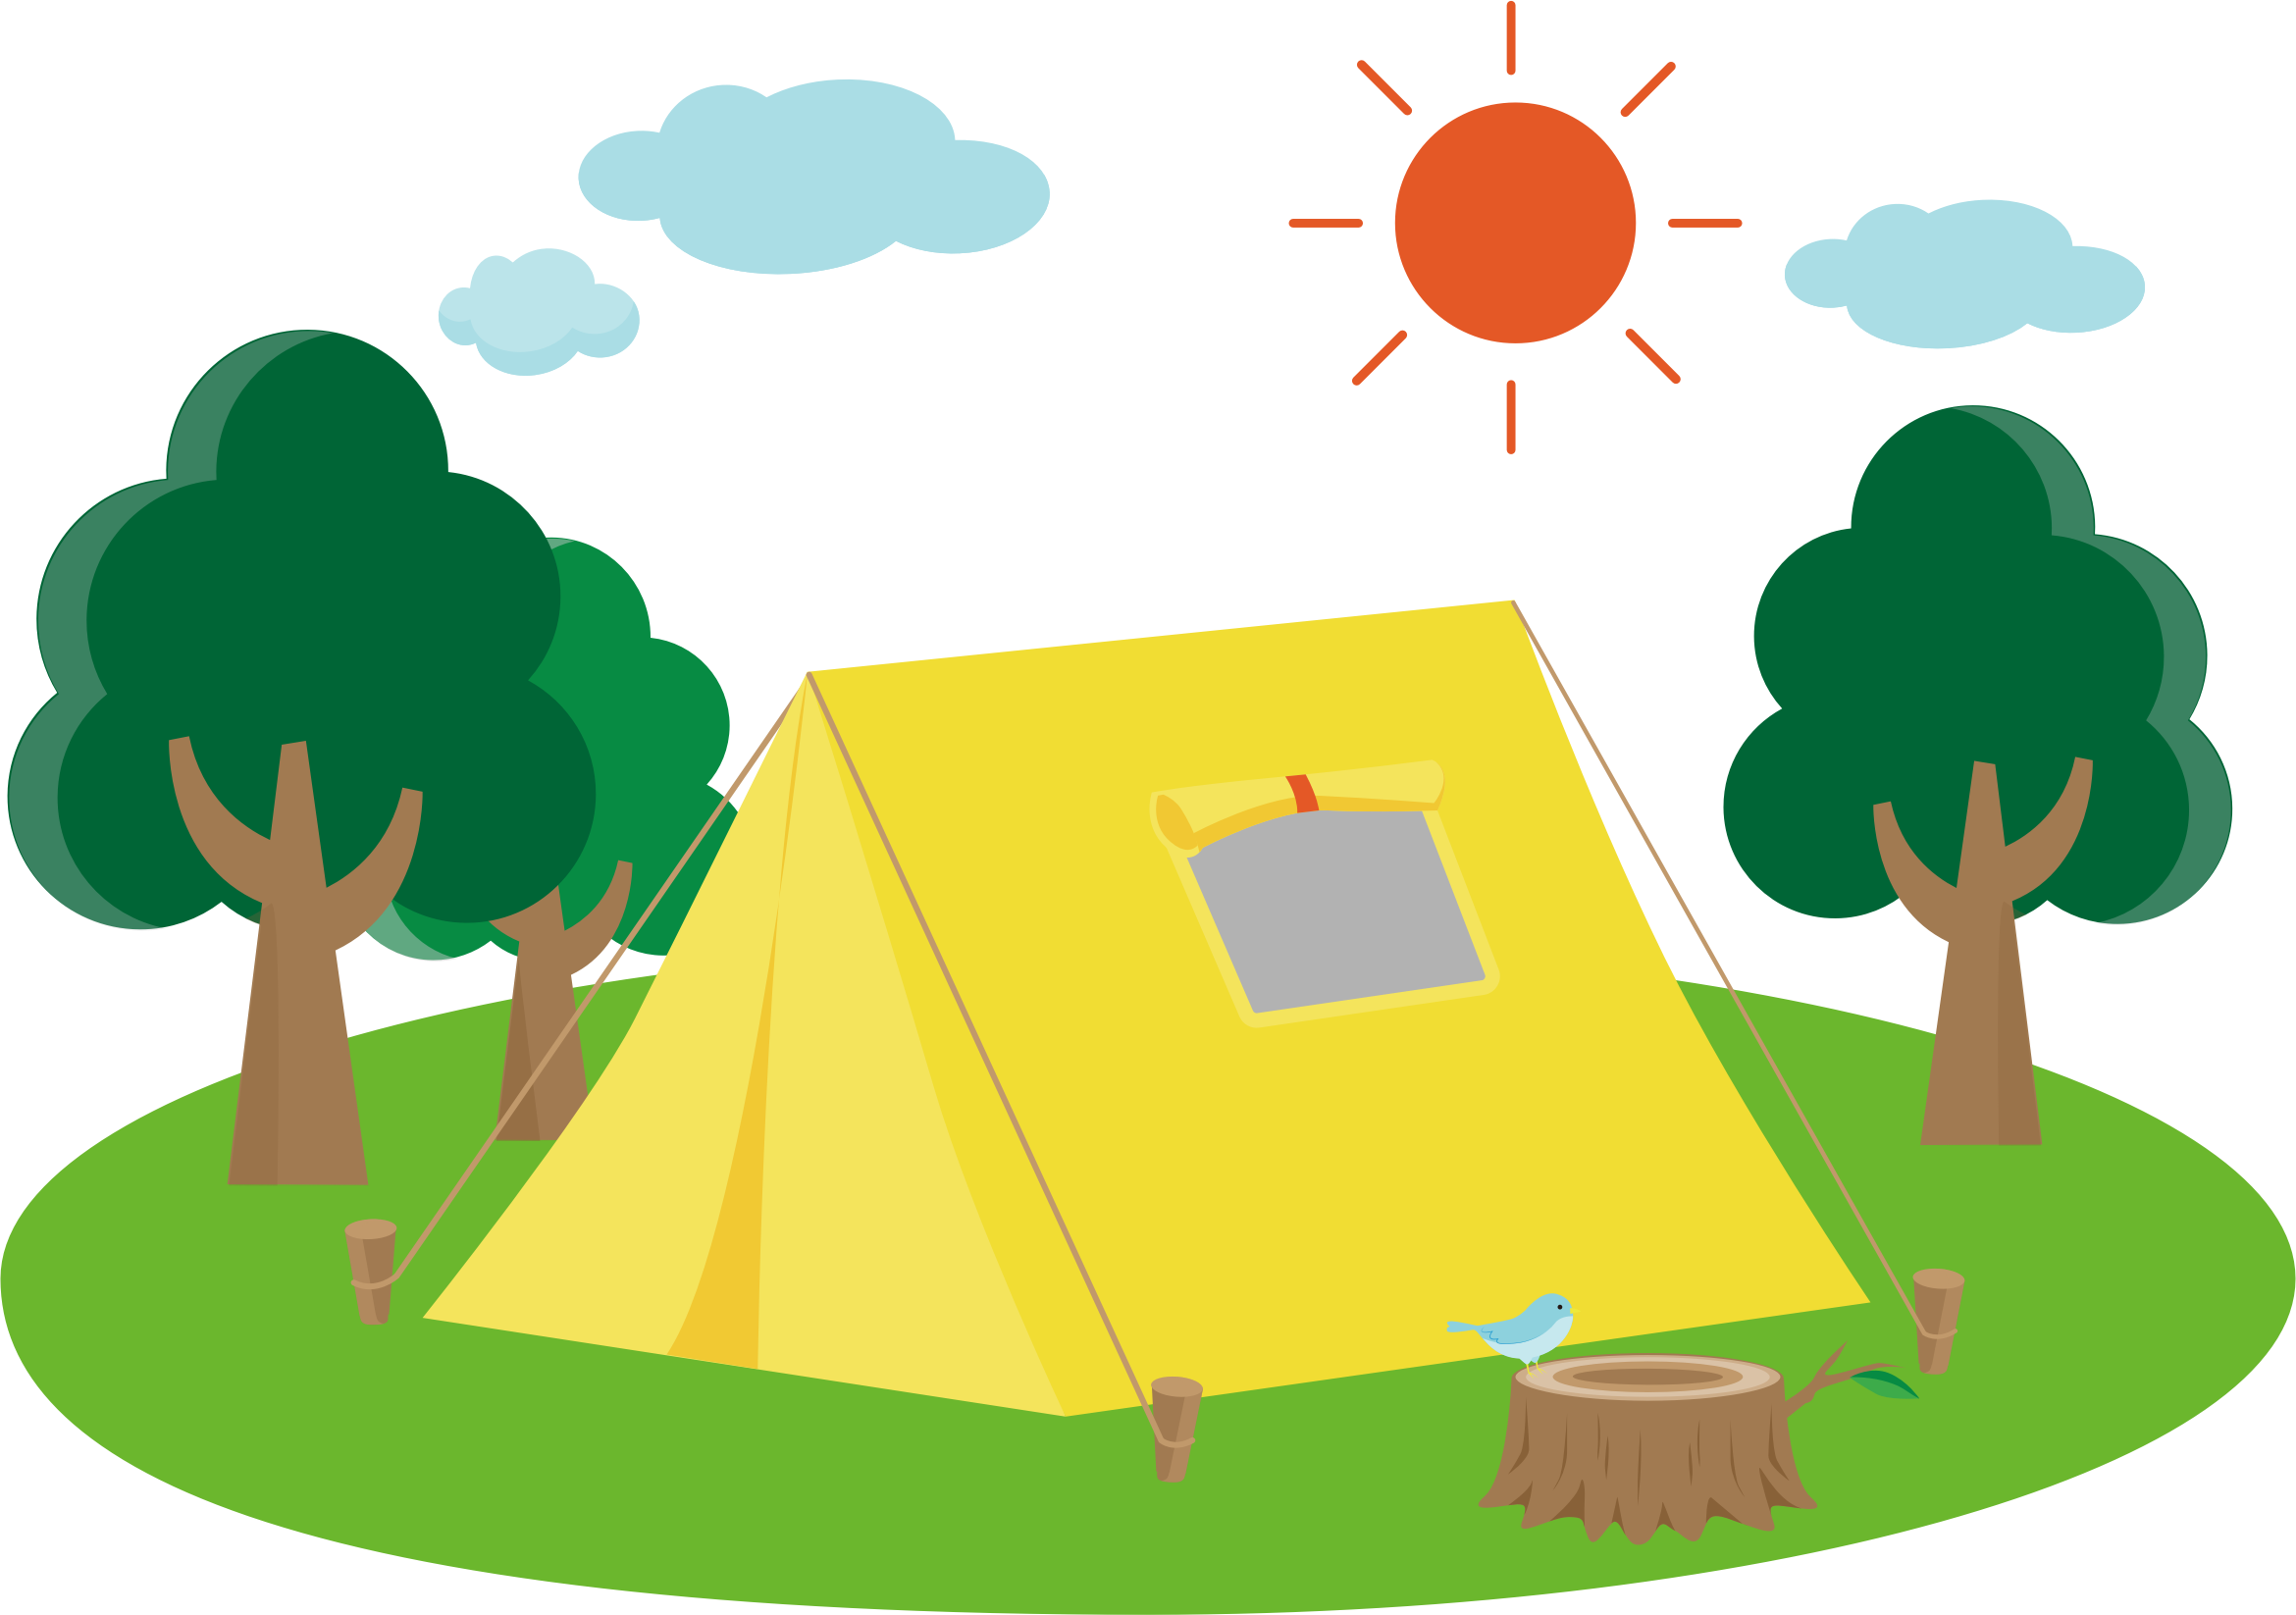 A Yellow Tent In A Grassy Area With Trees And A Sun